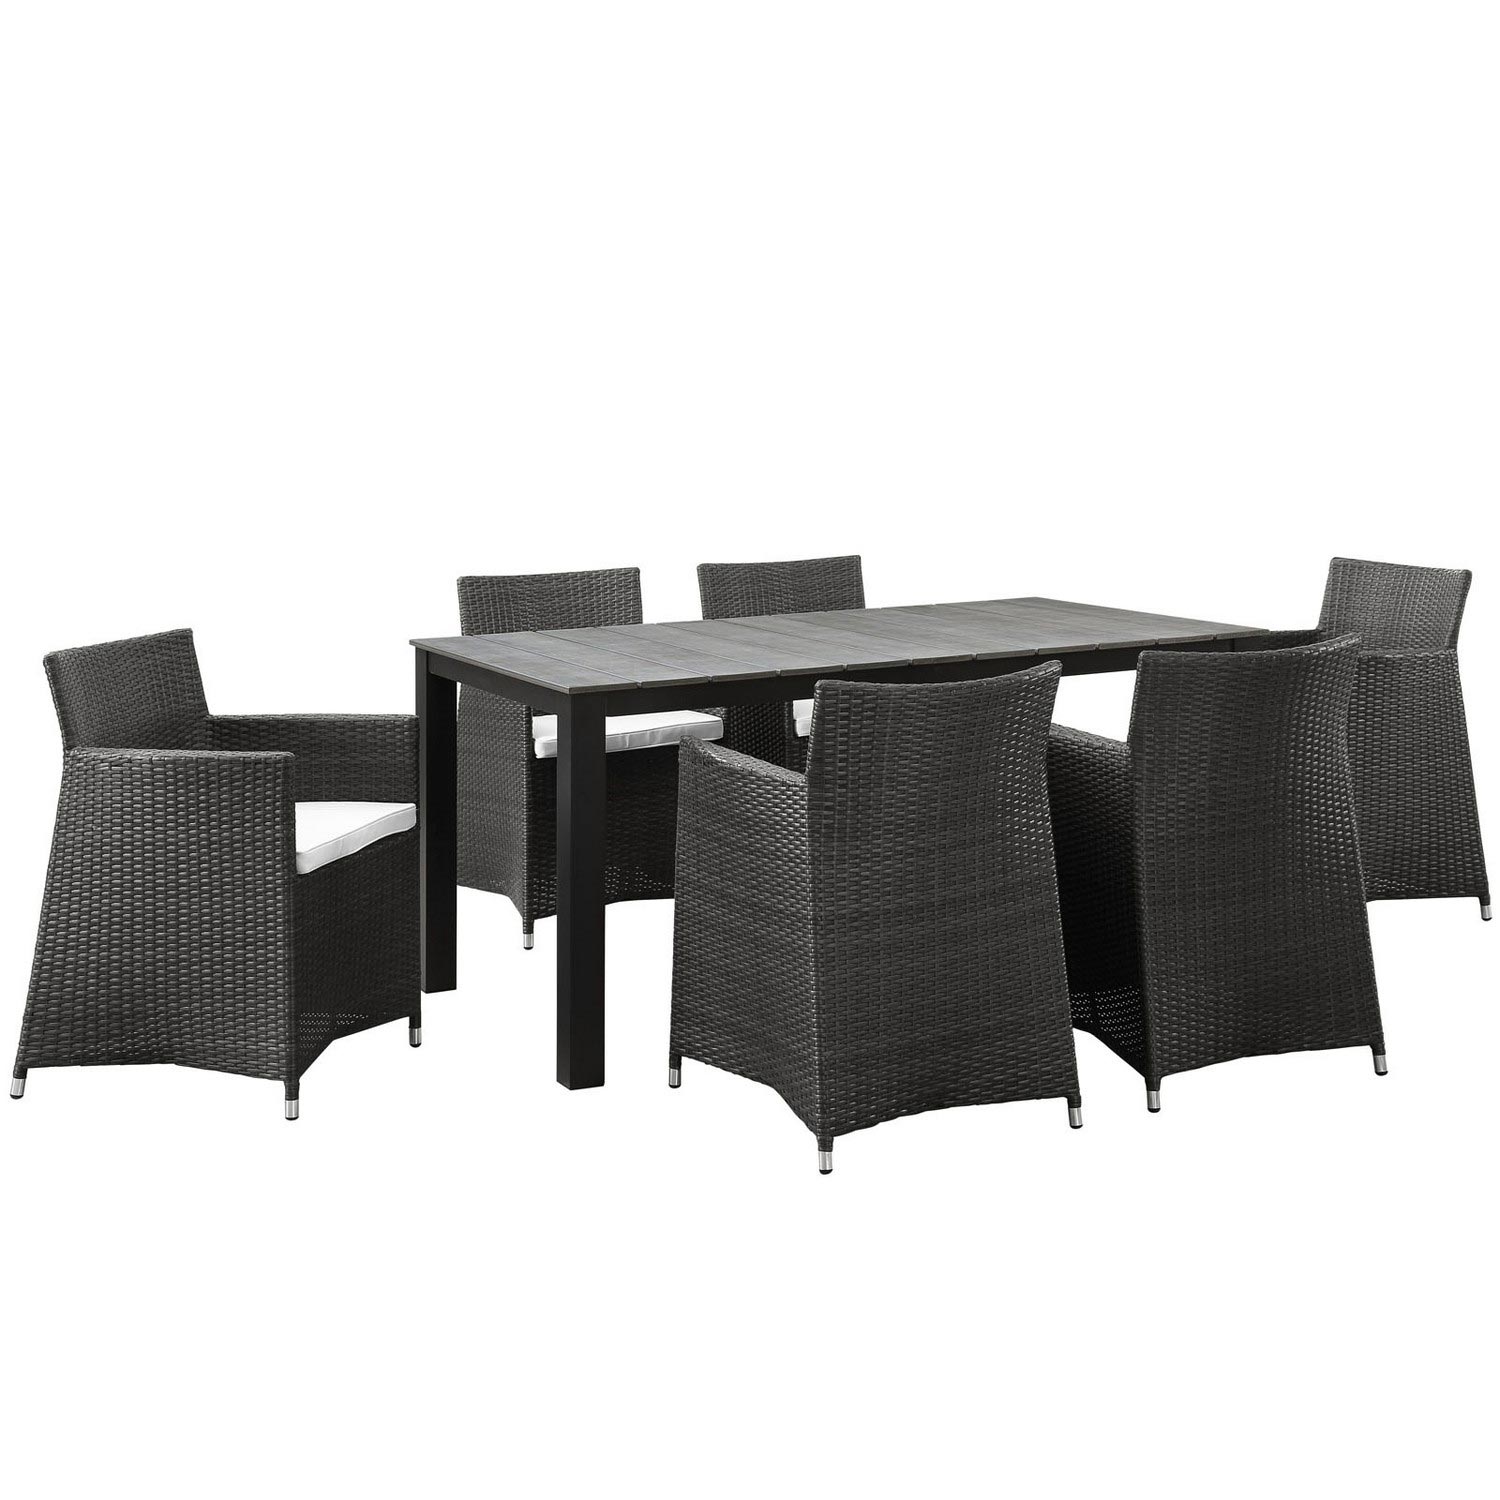 Modway Junction 7 Piece Outdoor Patio Dining Set - Brown/White